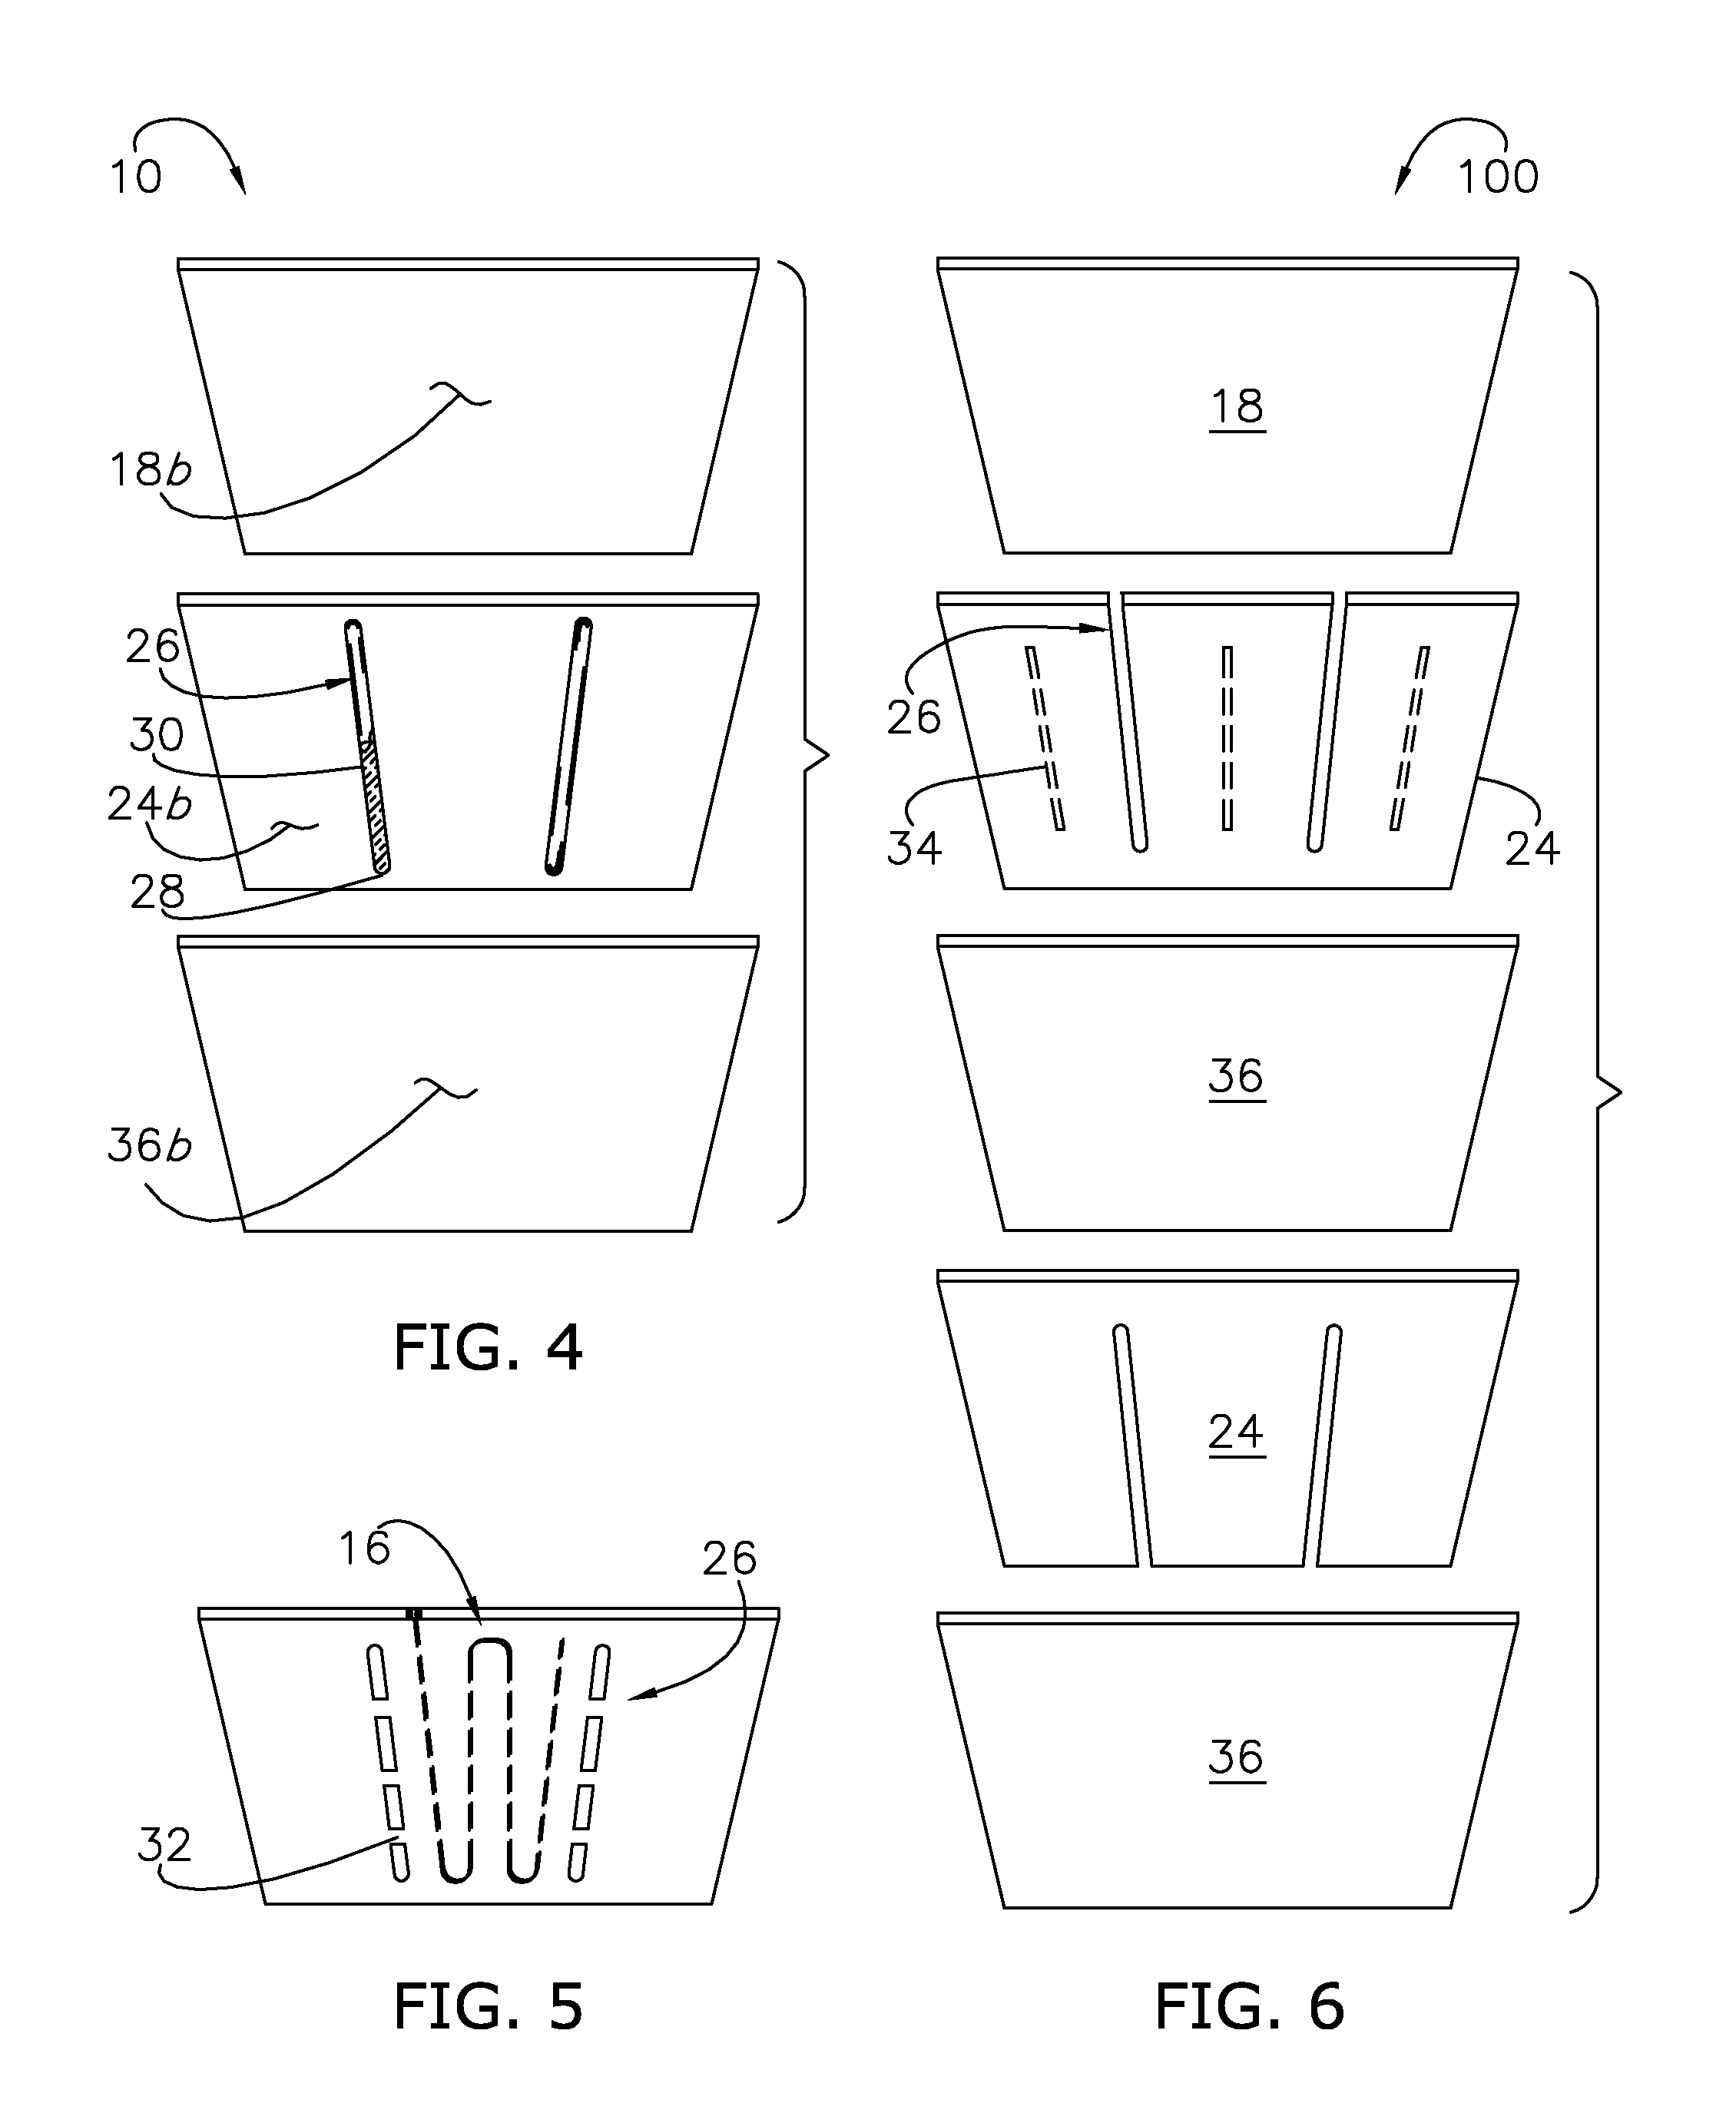 Multi-zone composite cooking griddle with unitary thermally conductive plate